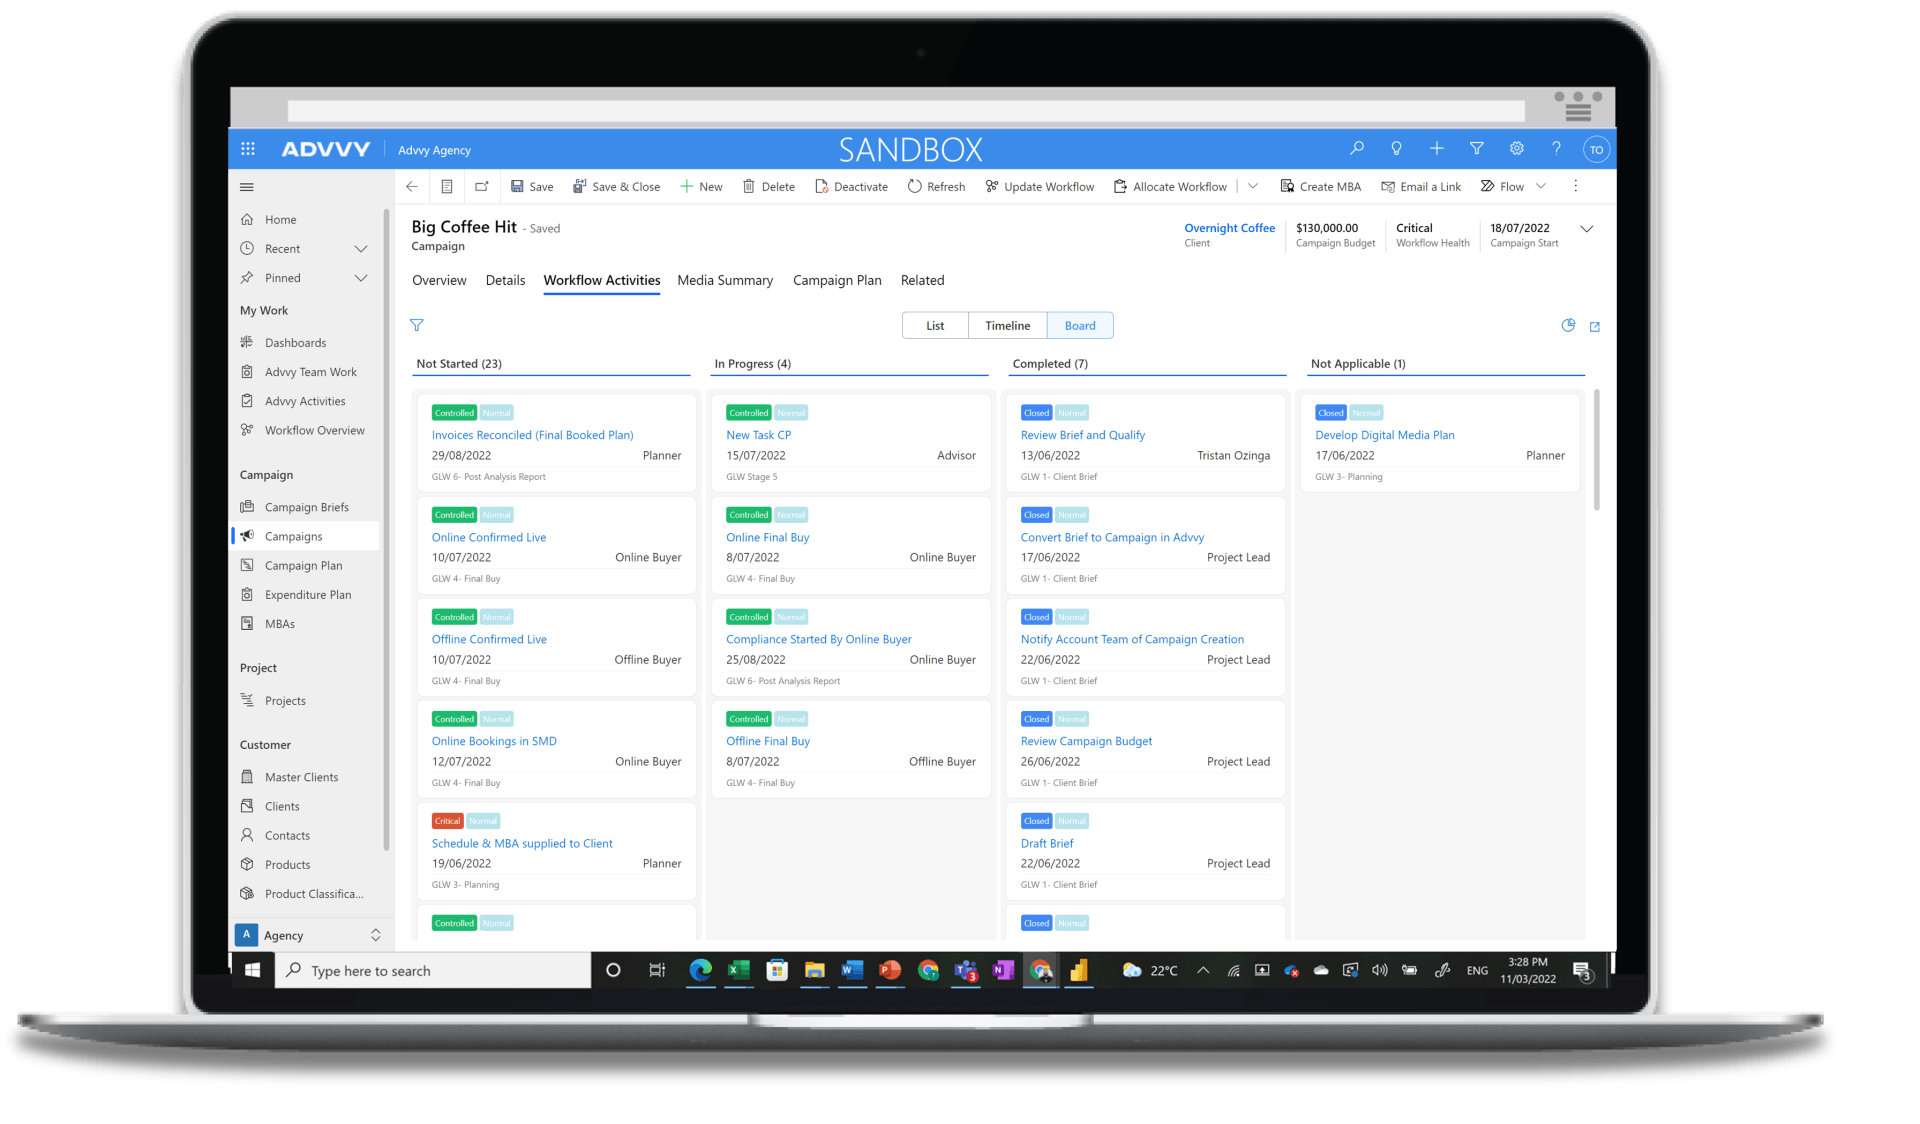 Kanban board view in Advvy's project management control for media campaign implementation